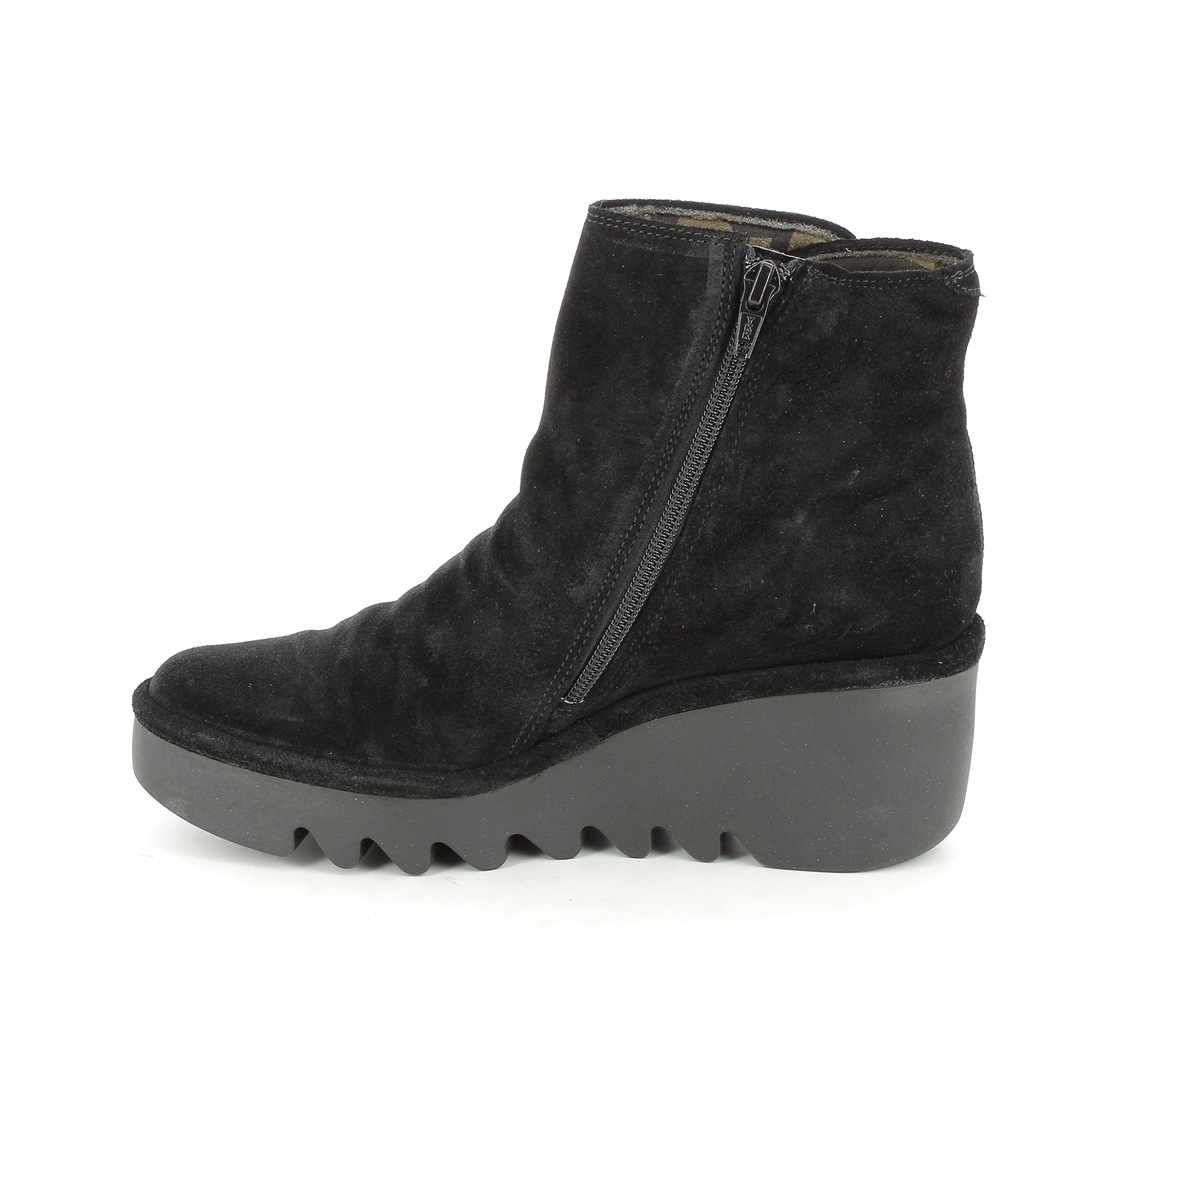 Fly London Brom Blu Black Suede Womens Wedge Boots P501344-001